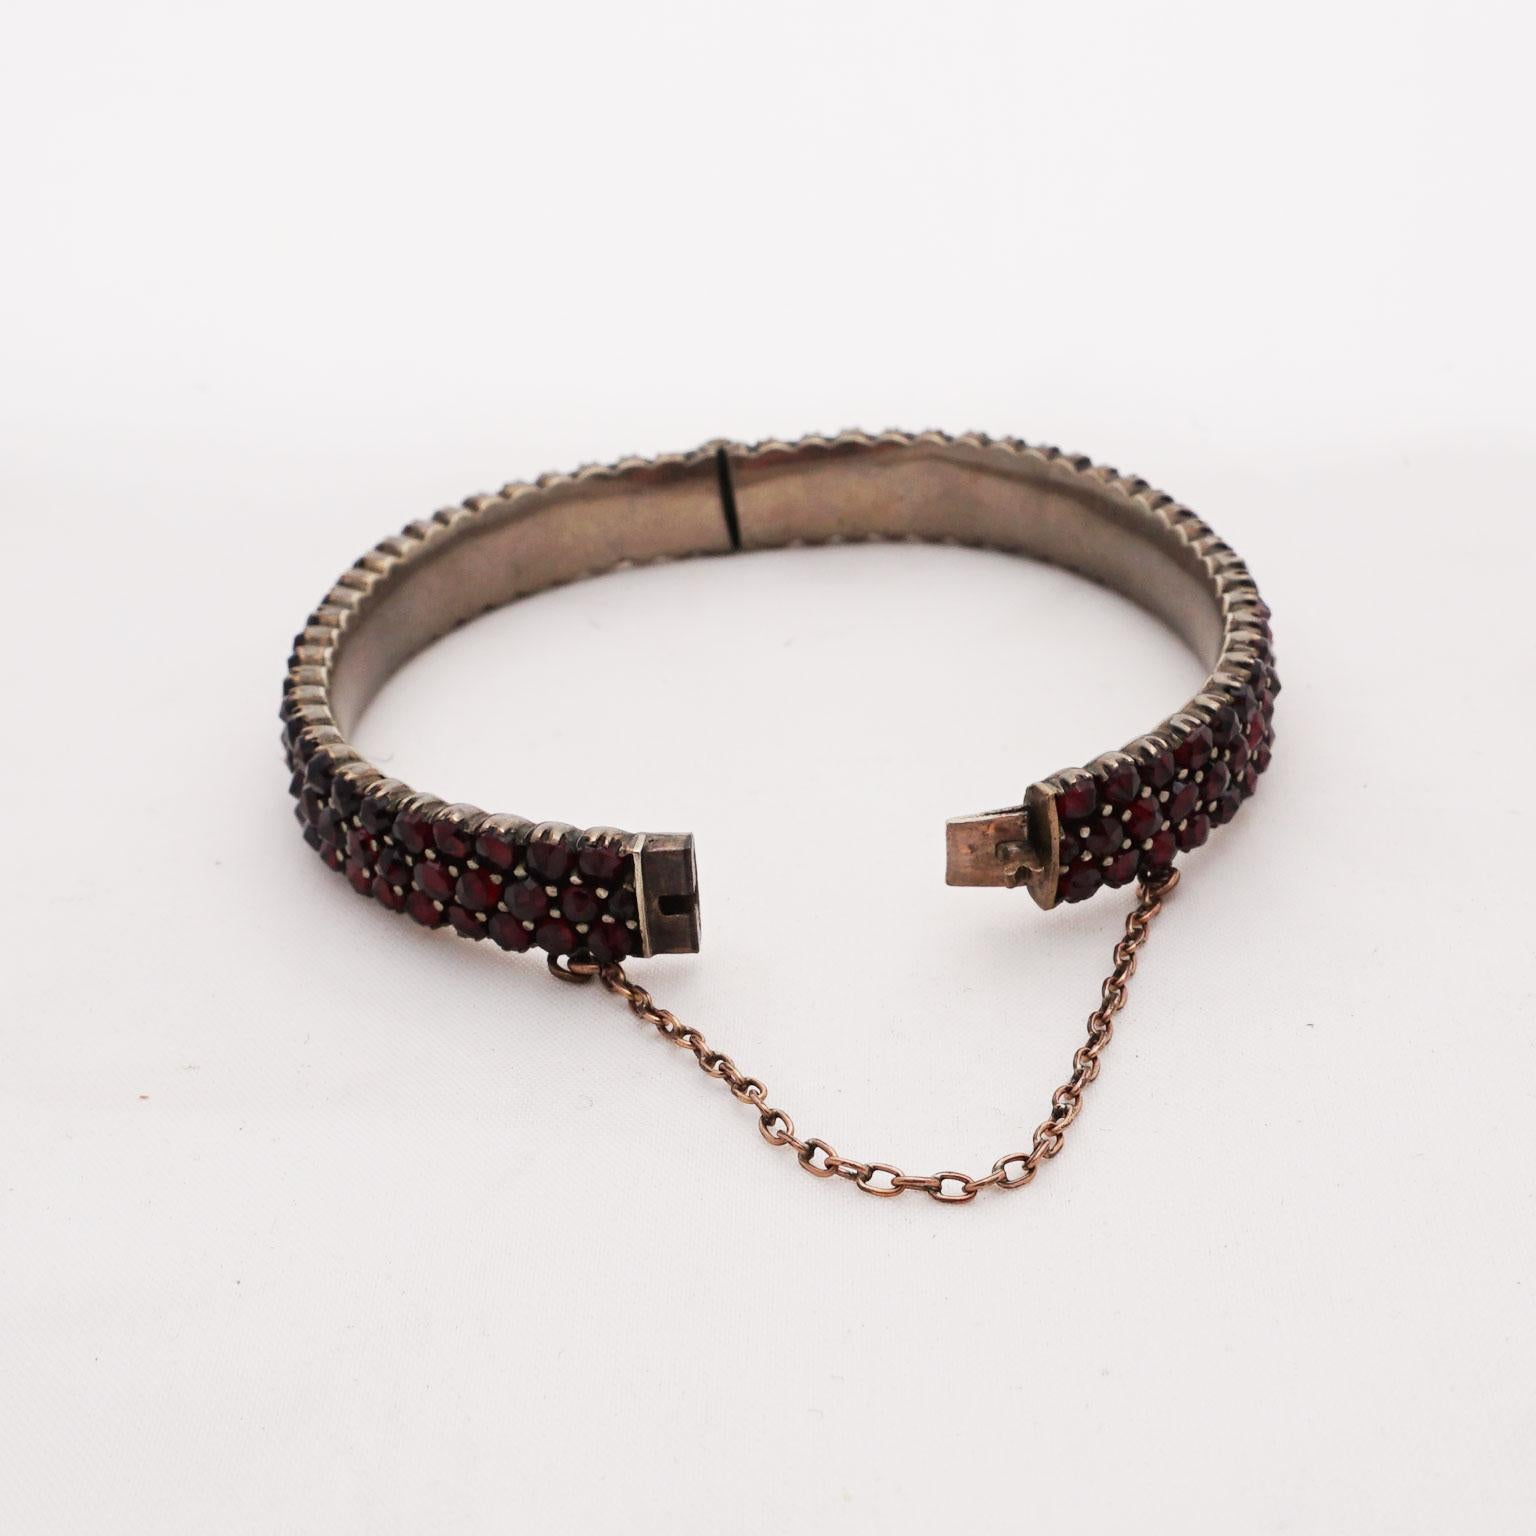 Biedermeier garnet bracelet around 1830
Silver-plated garnet gold bracelet, densely set with three rows of Bohemian garnet stones. 162 gemstones give this bracelet a noble glow of bygone times.
Snap lock with safety chain.
890 €
B: 9 mm
H: 66 mm
T: